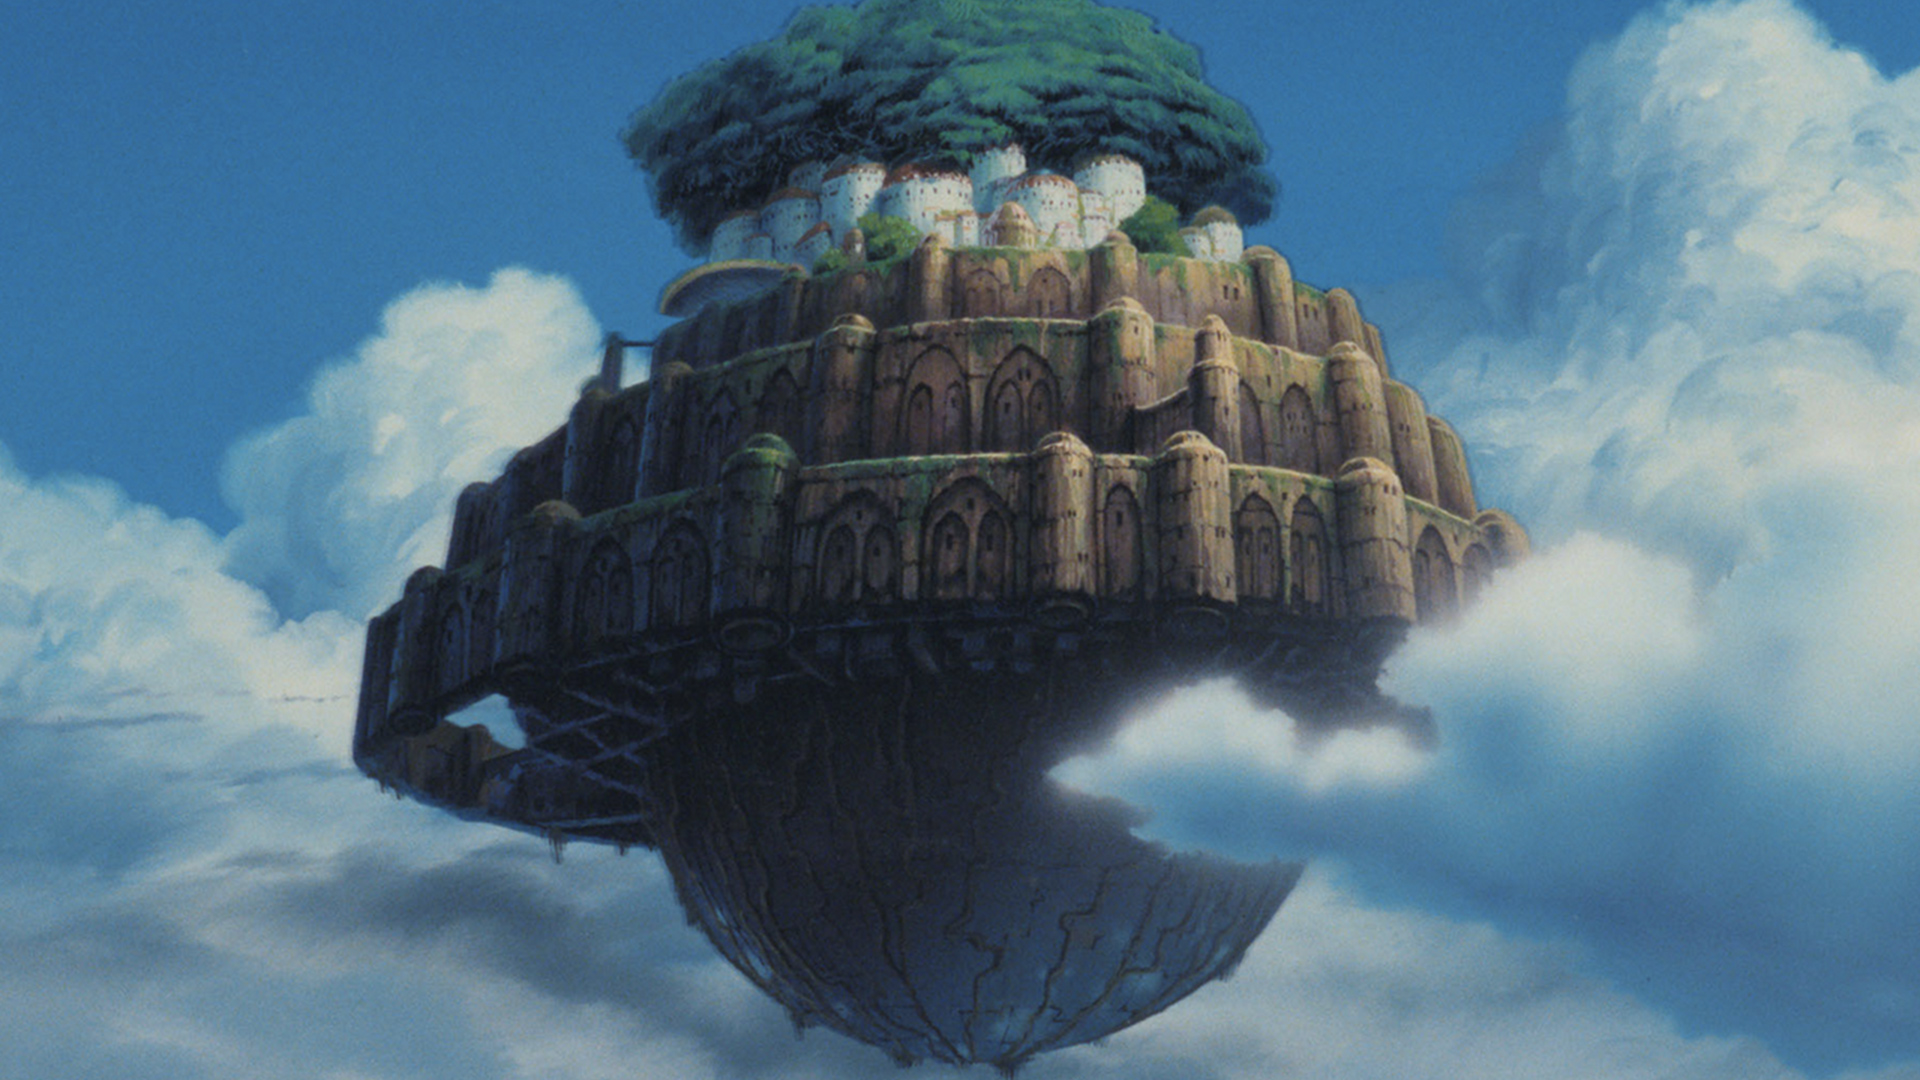 Floating castle from Castle in the Sky